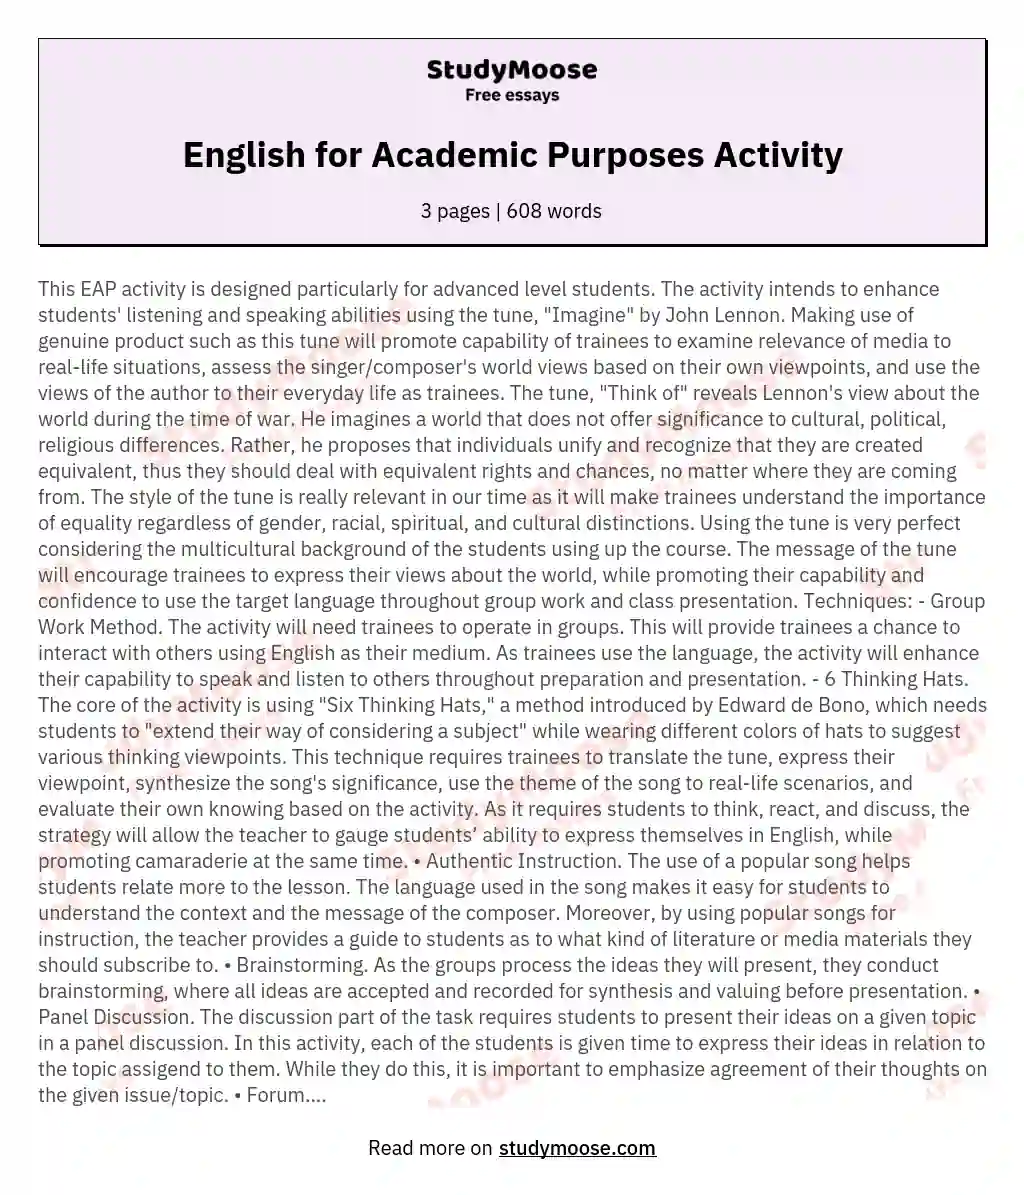 English for Academic Purposes Activity